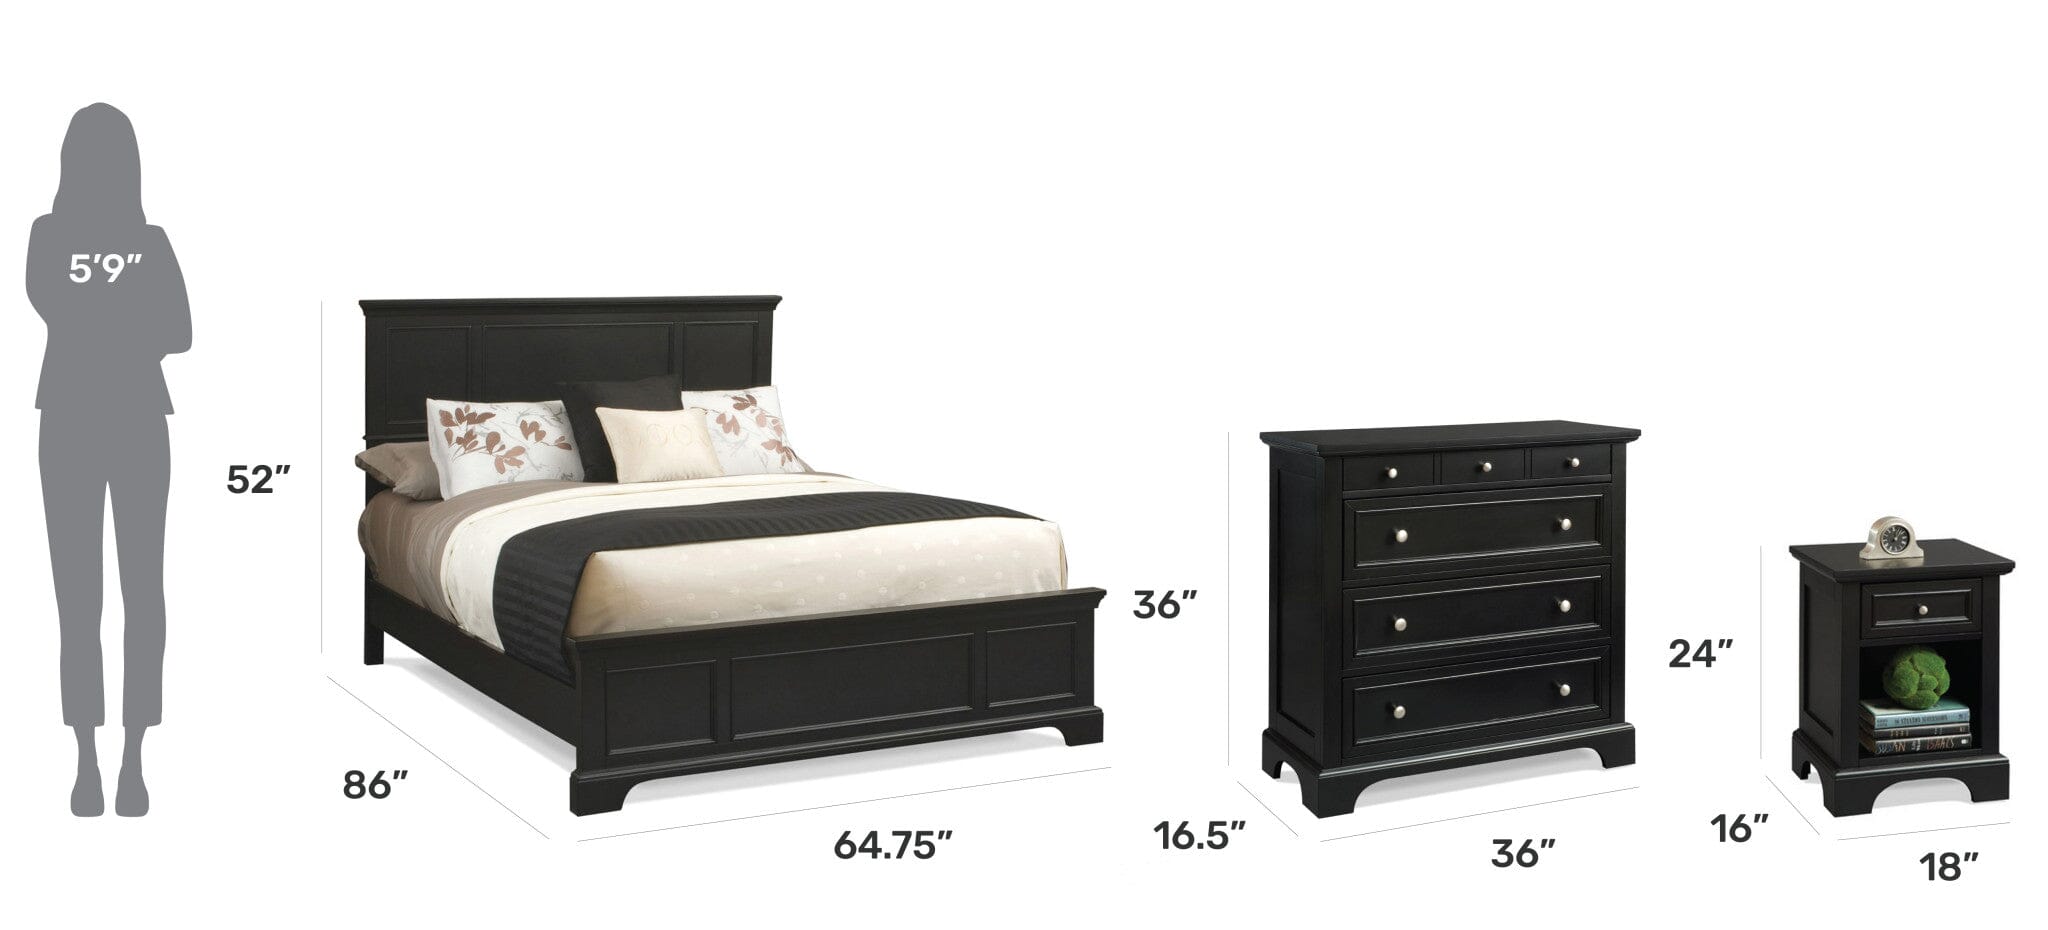 Traditional Queen Bed, Nightstand and Chest By Bedford Queen Bed Bedford